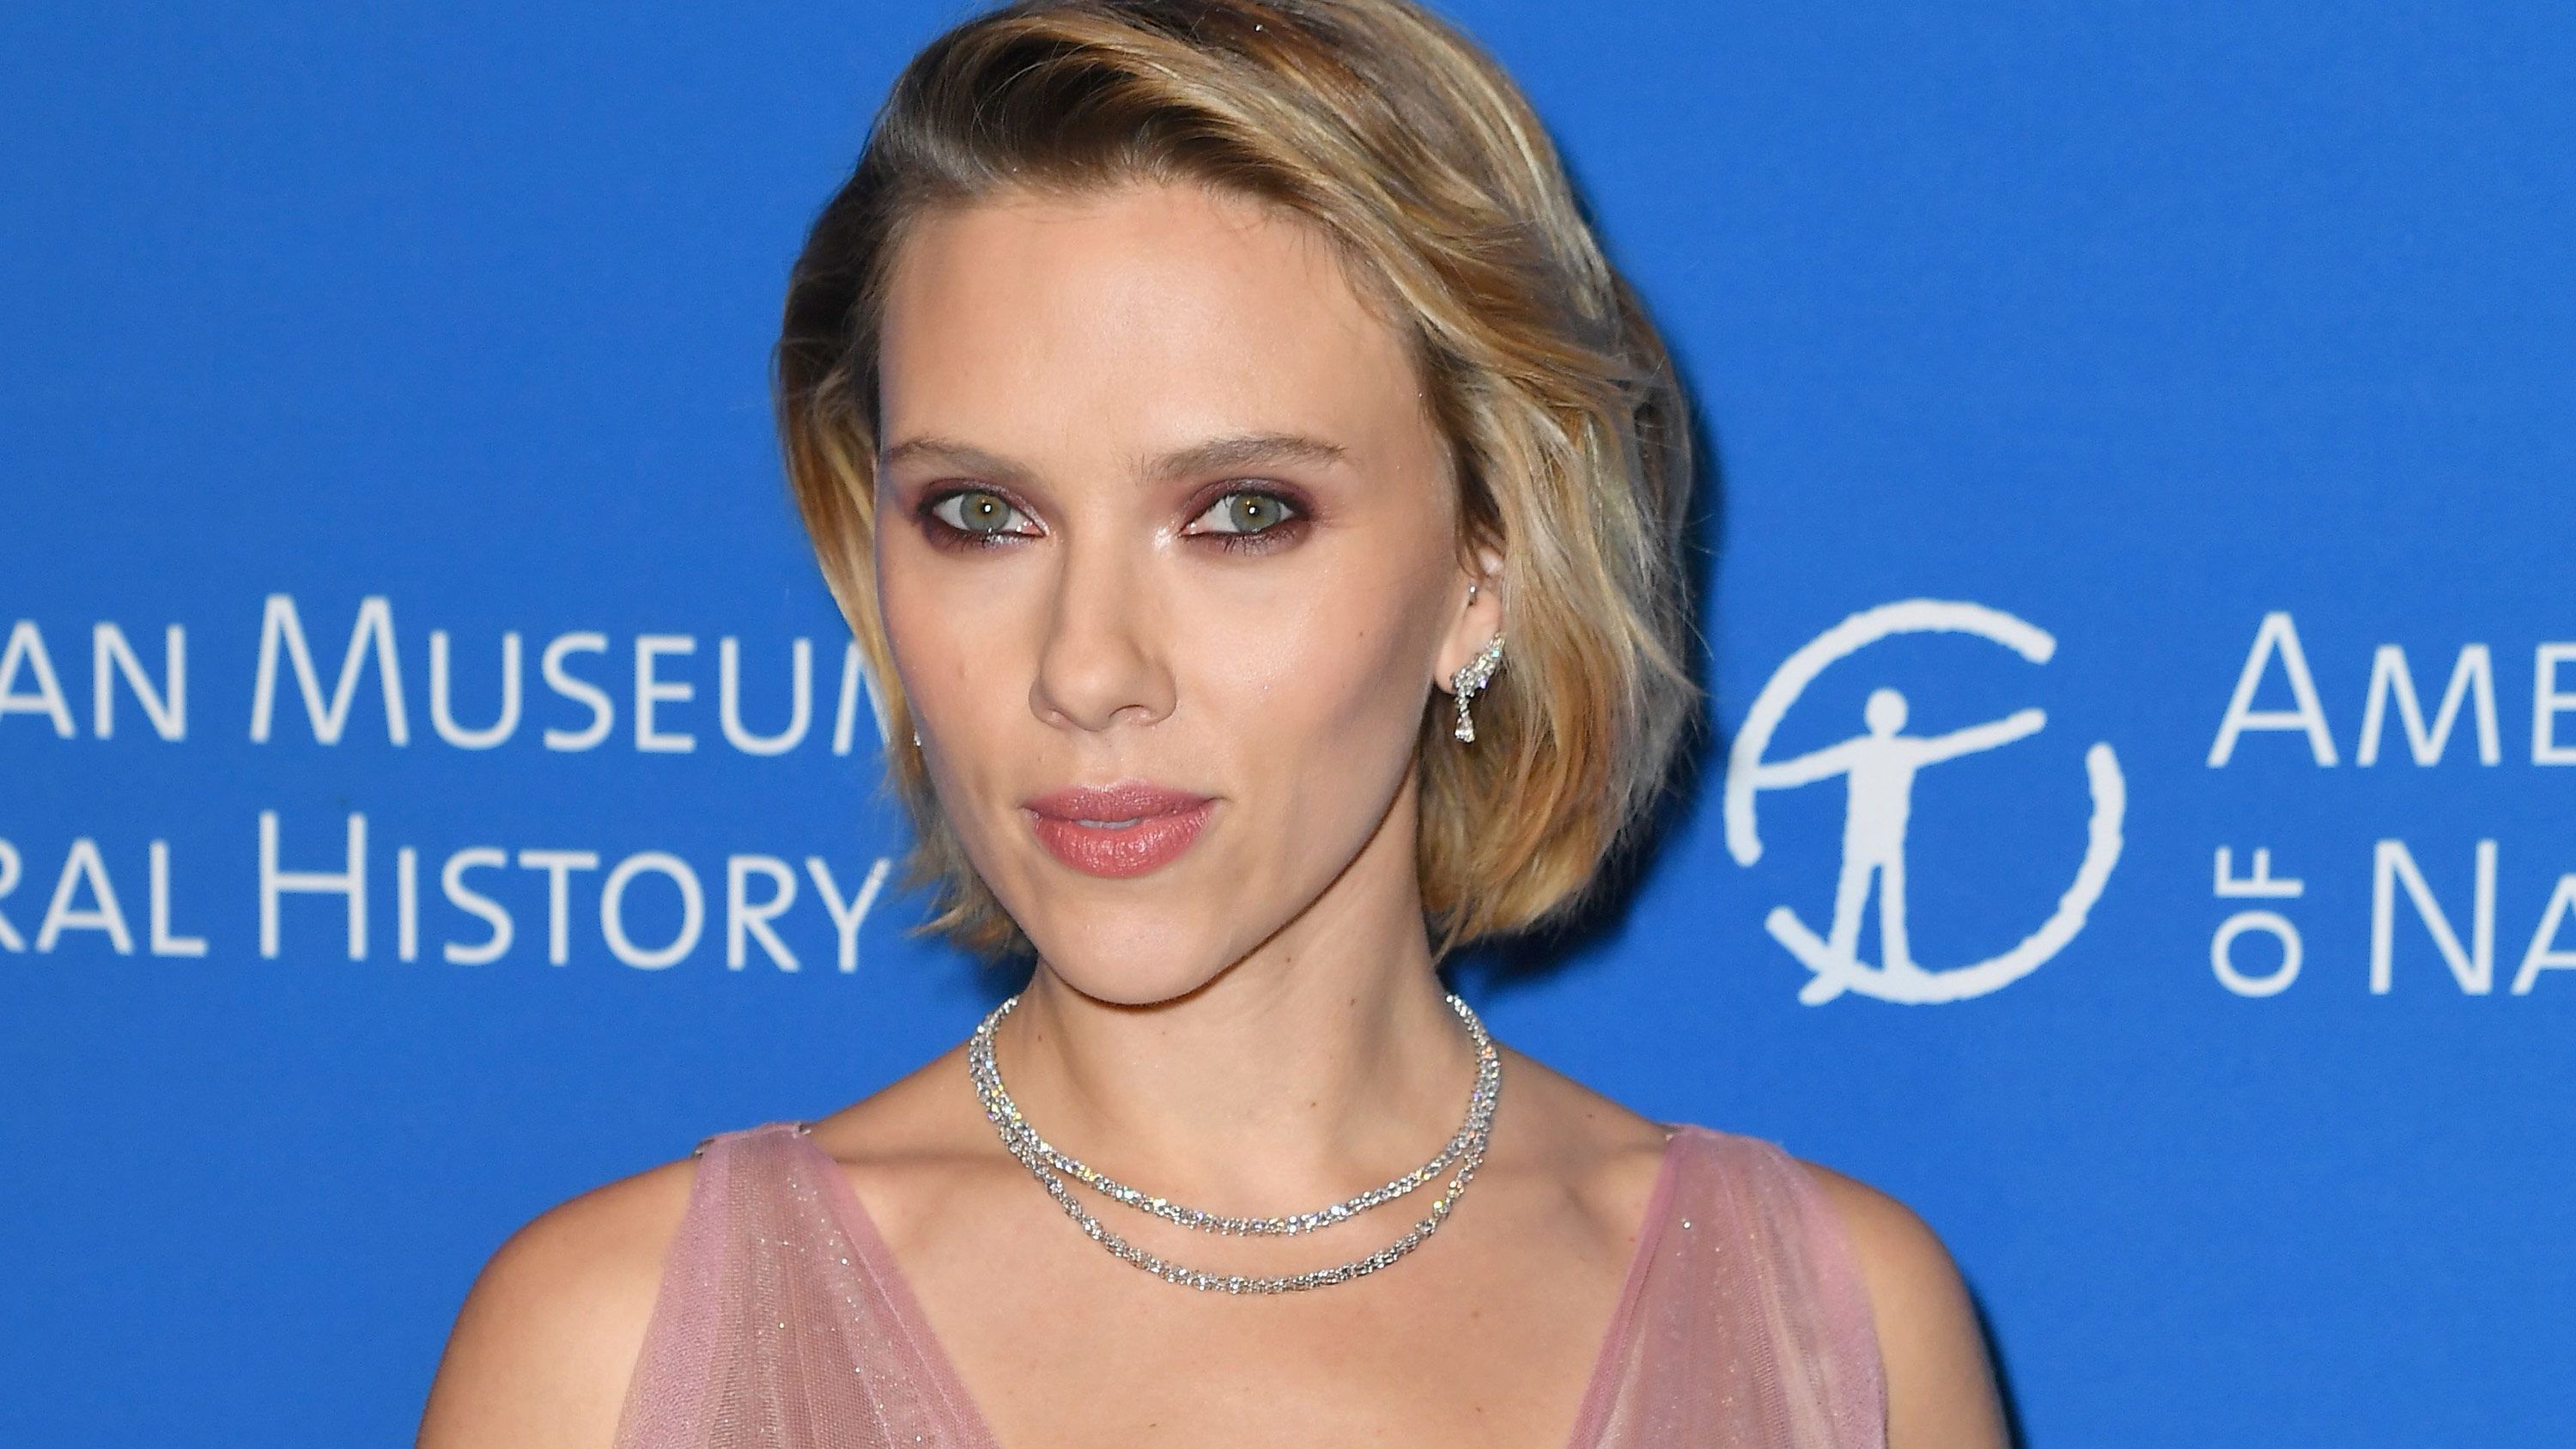 Scarlett Johansson says her comments on playing any person were